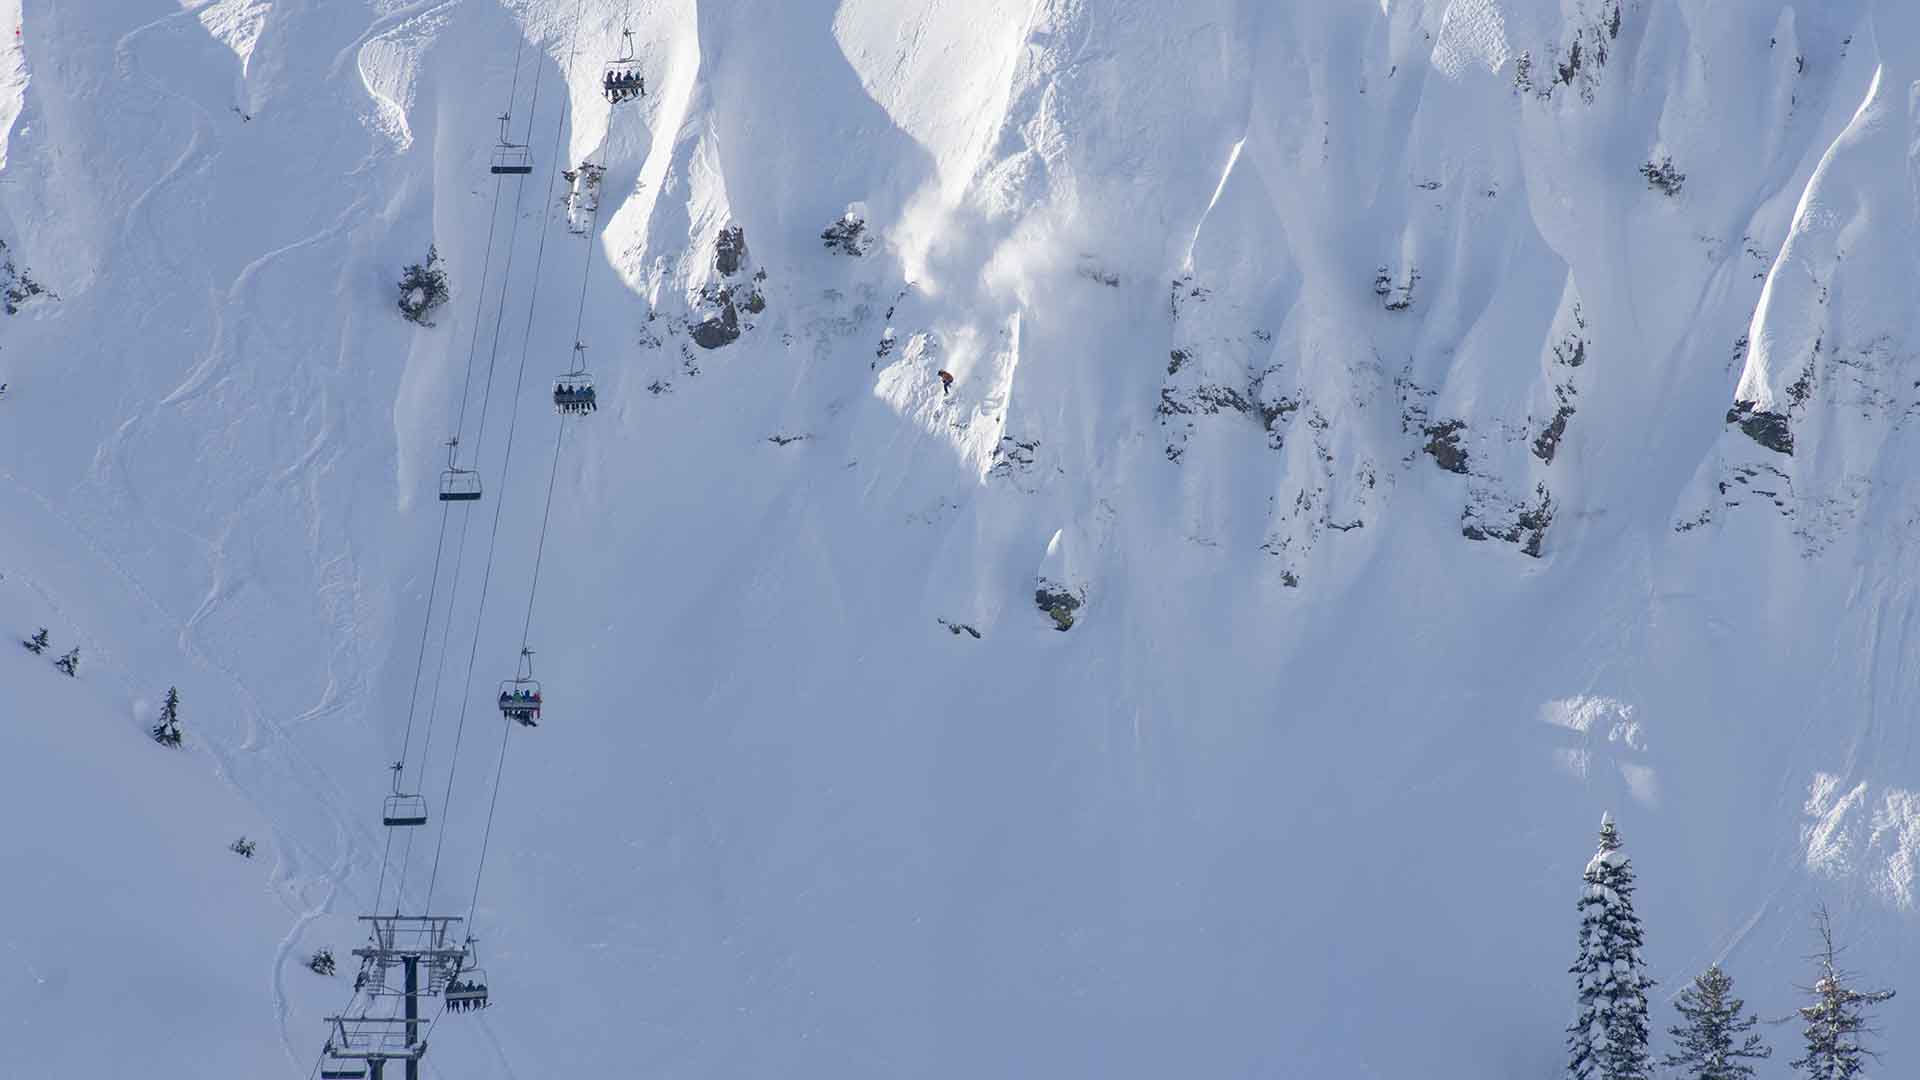 Skiers and snowboarders race down KT-22's famous "fingers" on a powder day.